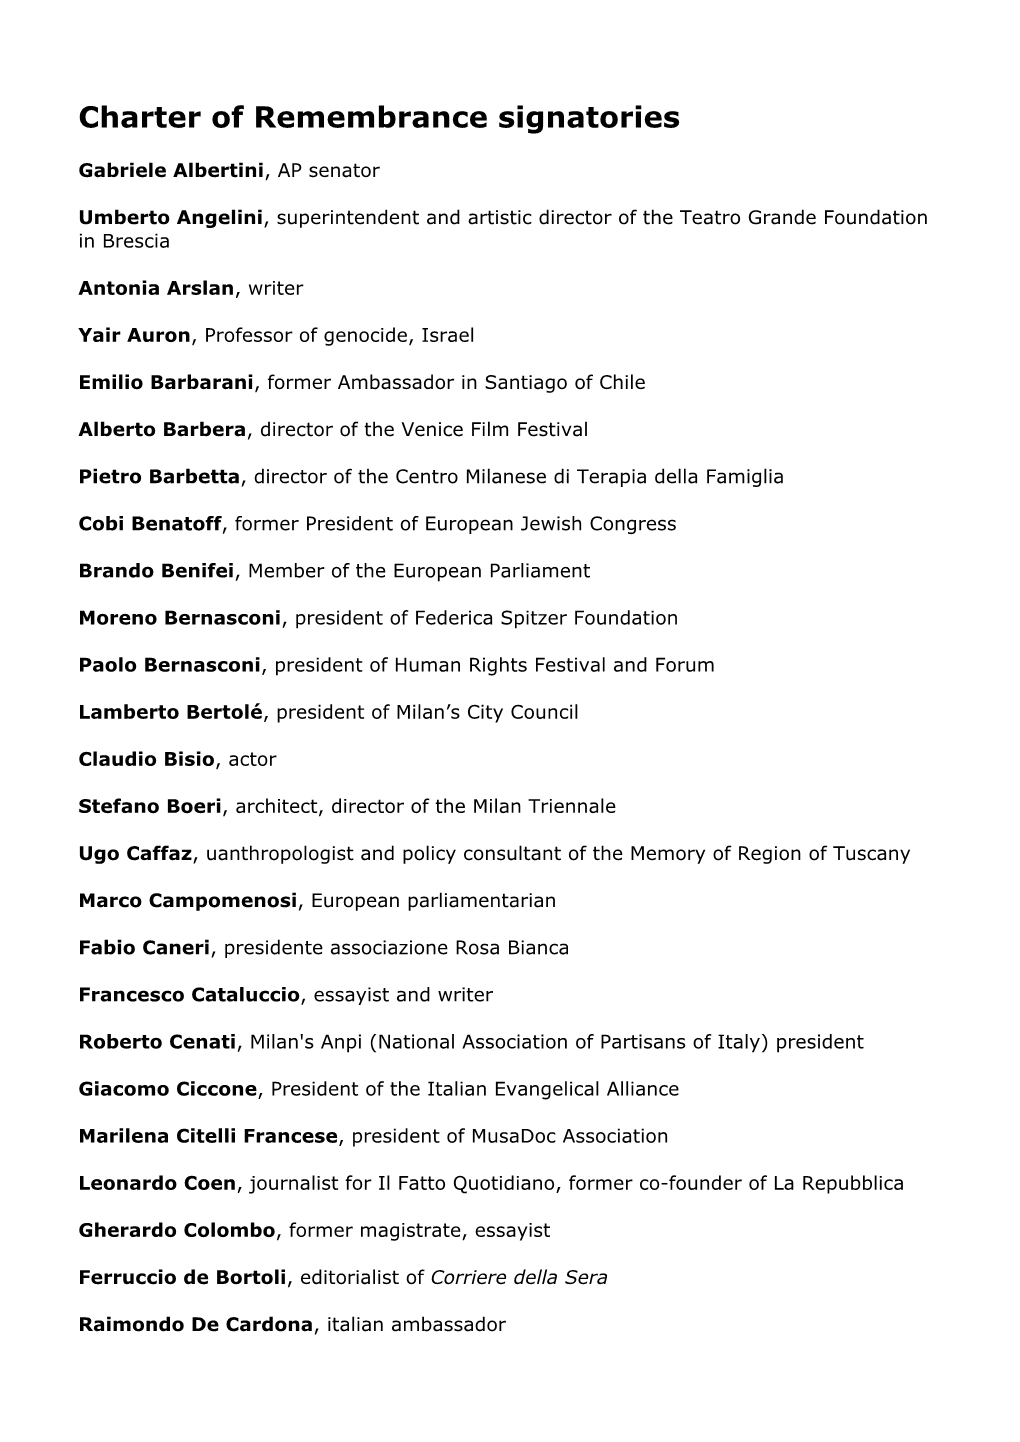 Charter of Remembrance Signatories